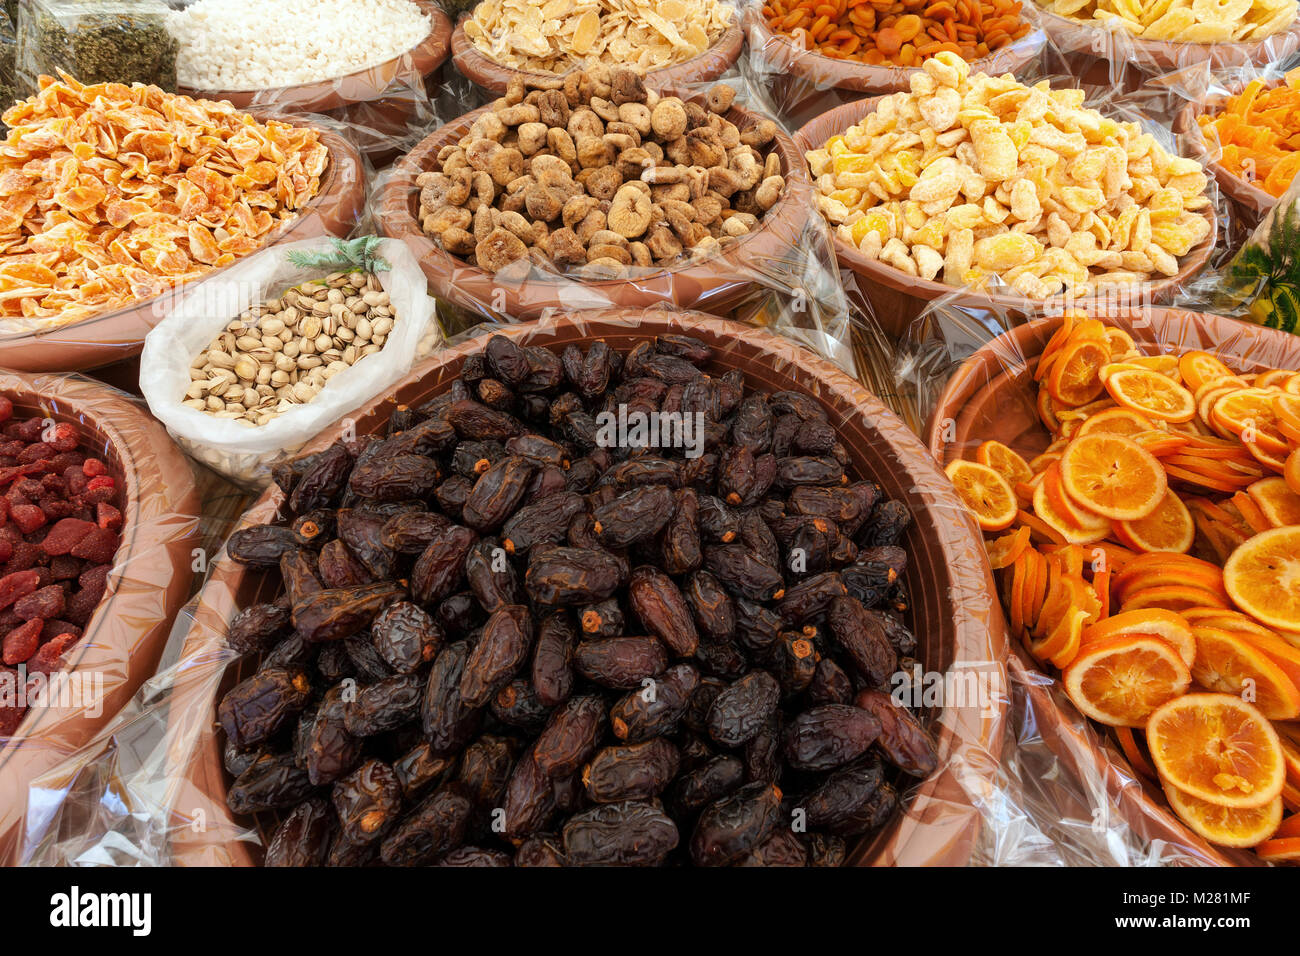 Dried and candied fruits at a market stall in Cannobio, Lago Maggiore, Verbano-Cusio-Ossola province, Piedmont region, Italy Stock Photo